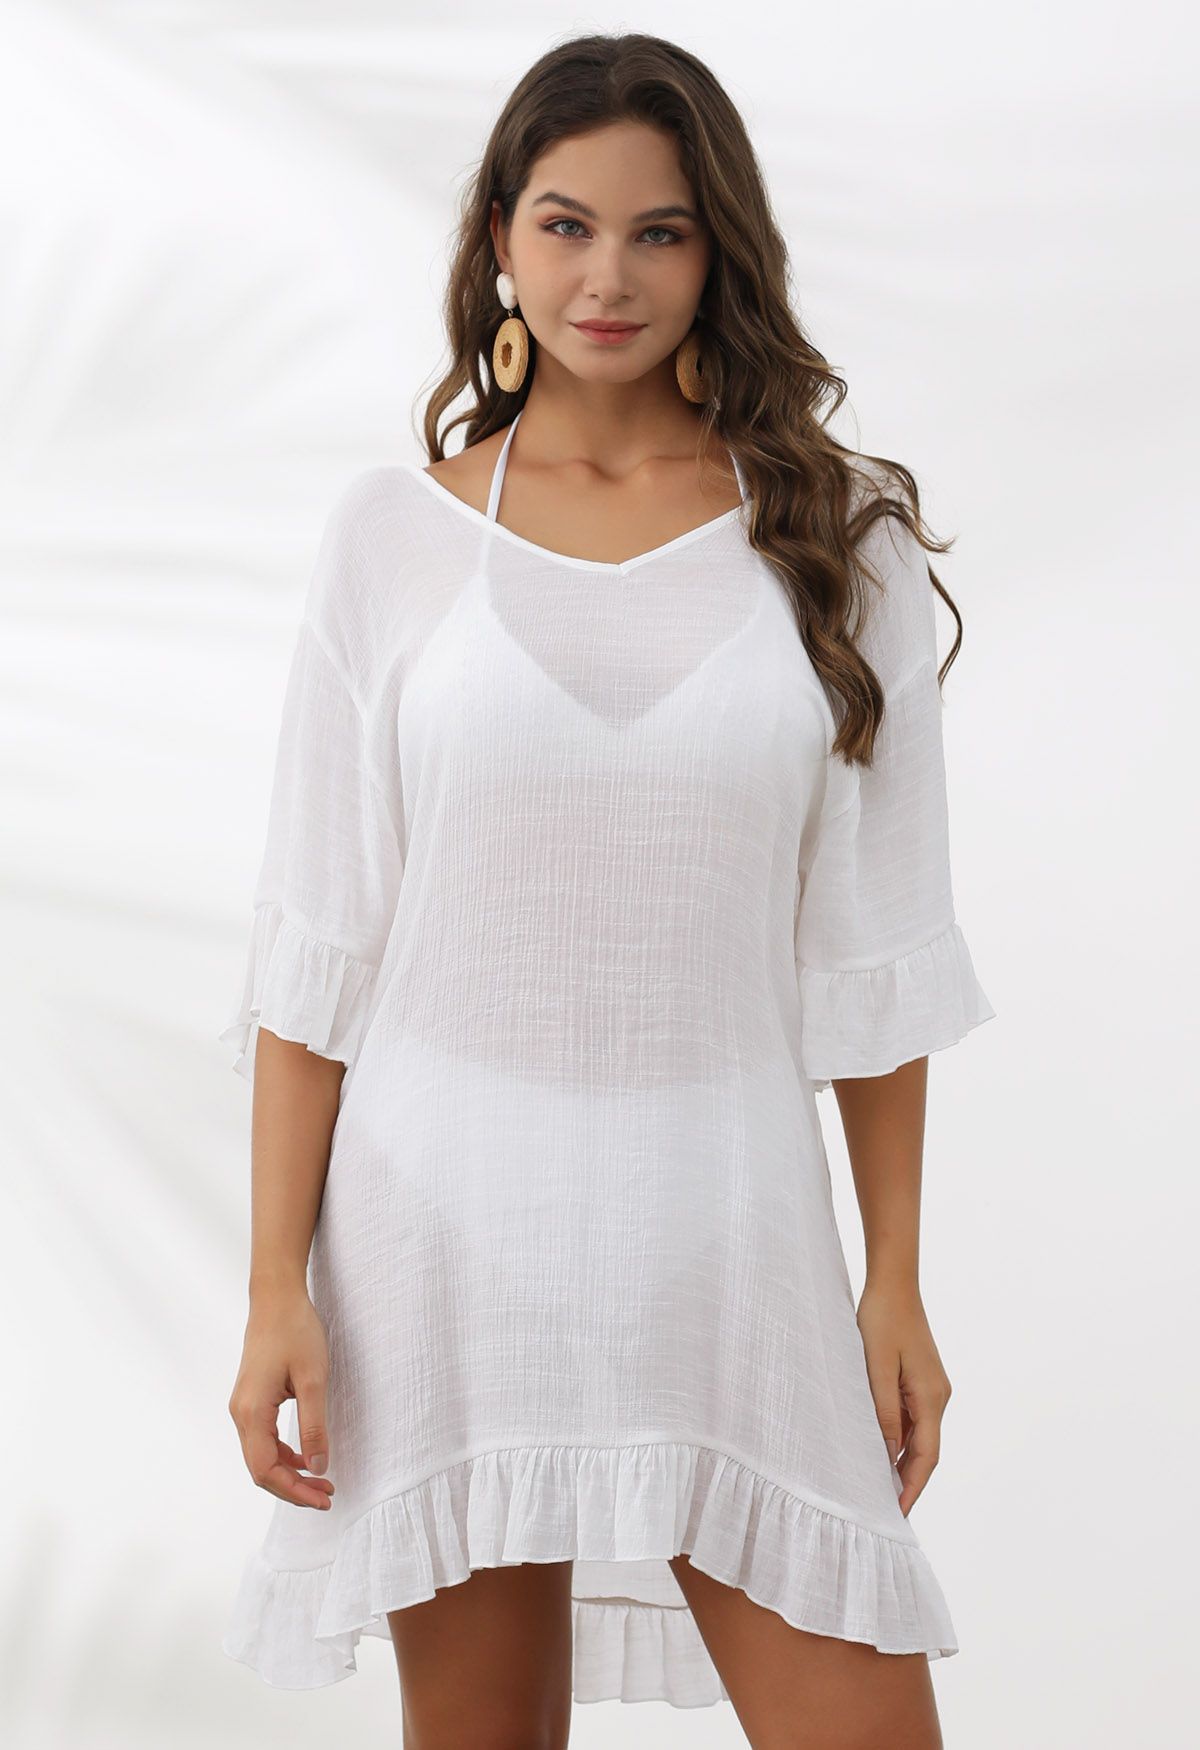 Butterfly Crochet Backless Cover-Up Dress in White